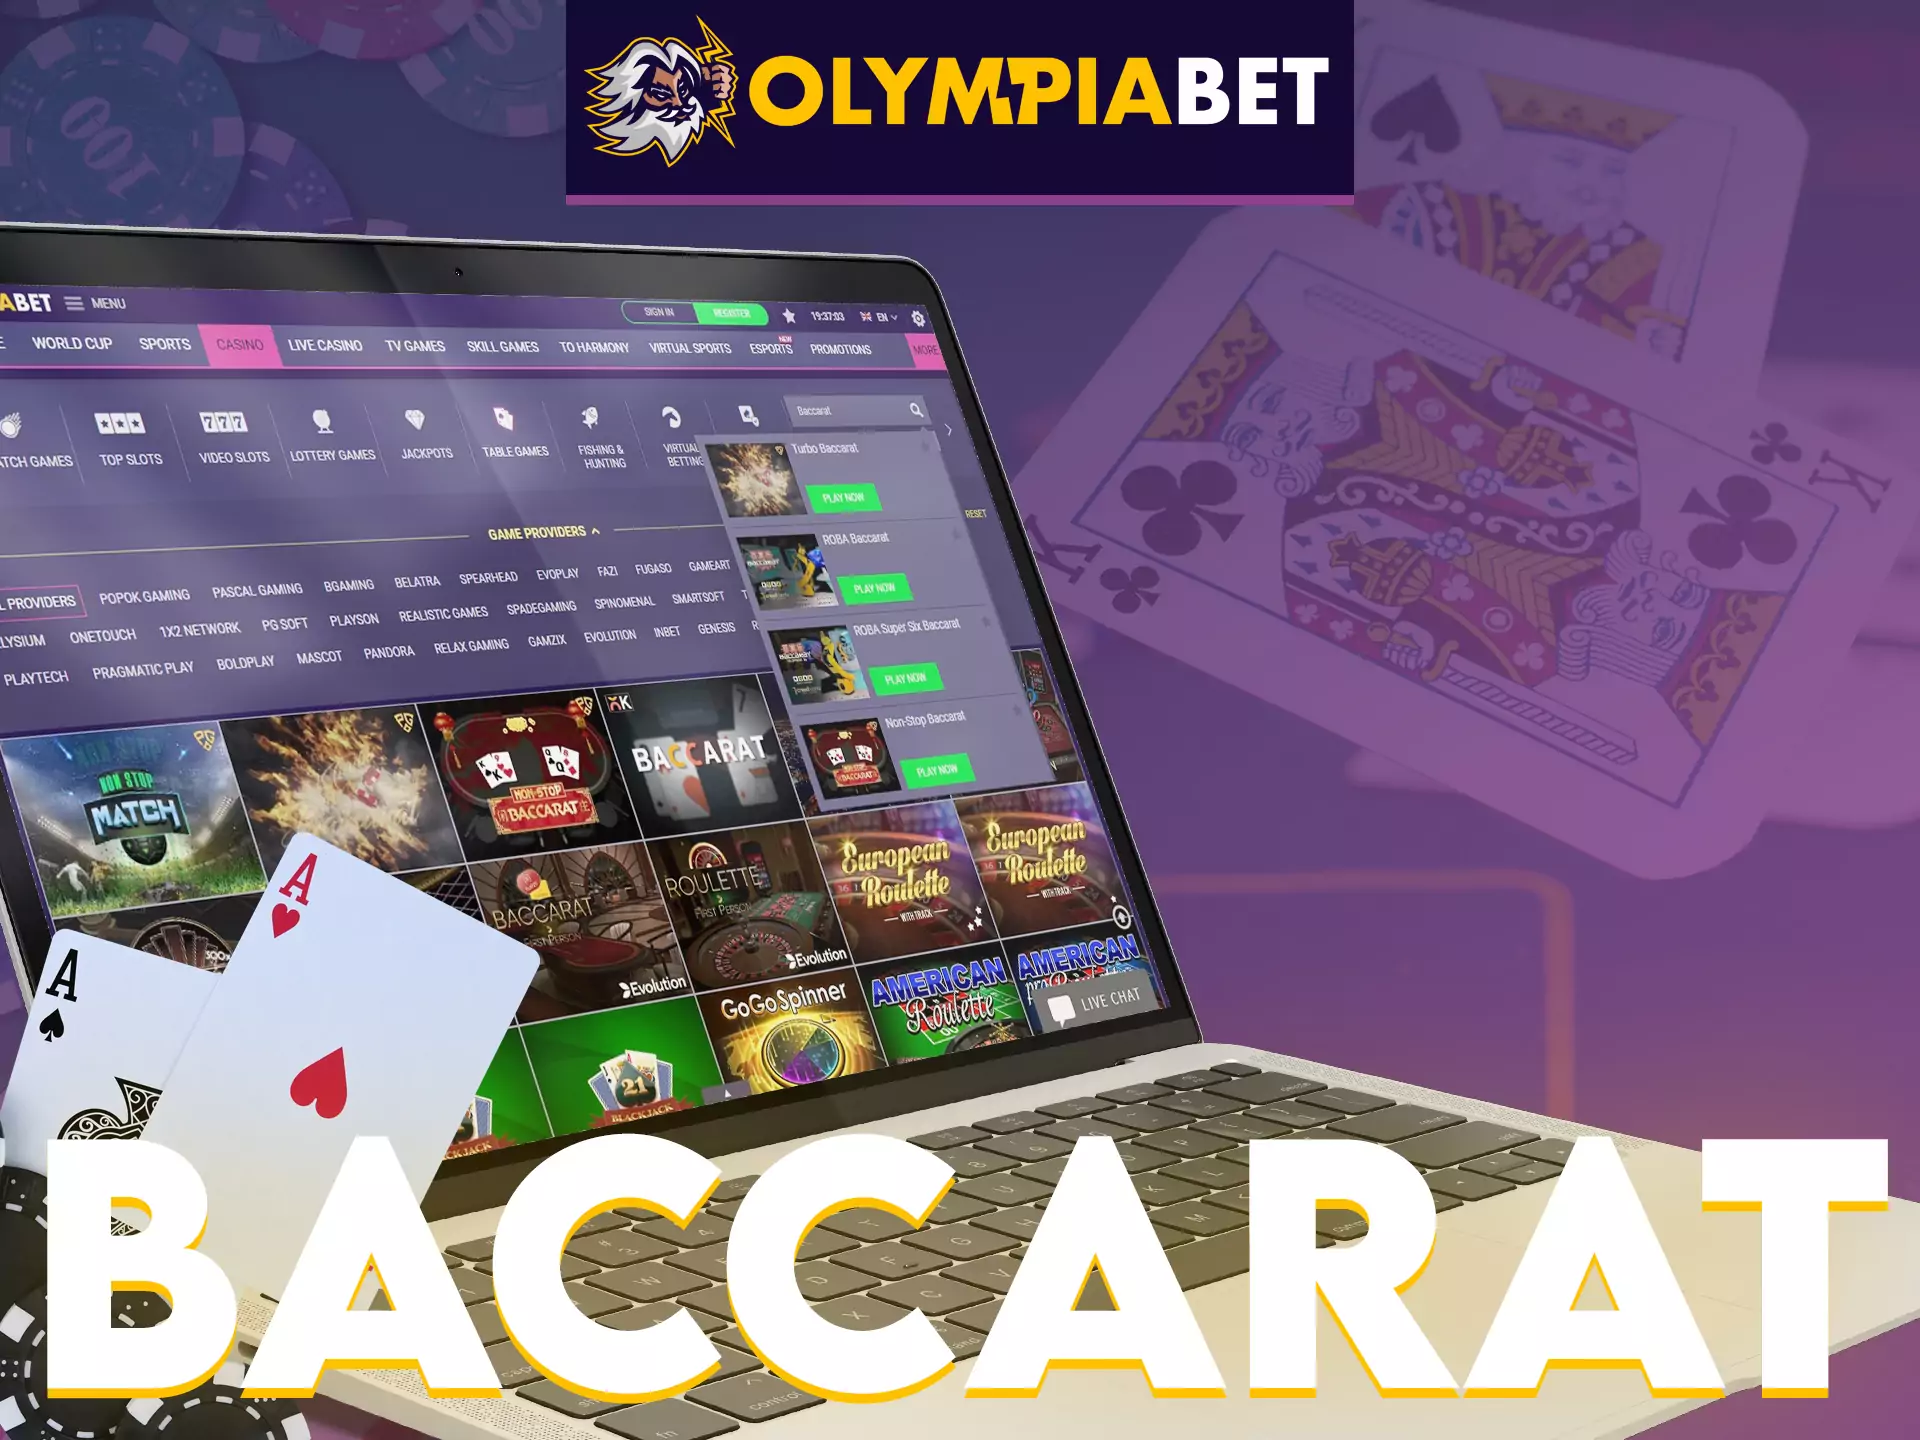 Show off your baccarat skills at OlympiaBet Casino.